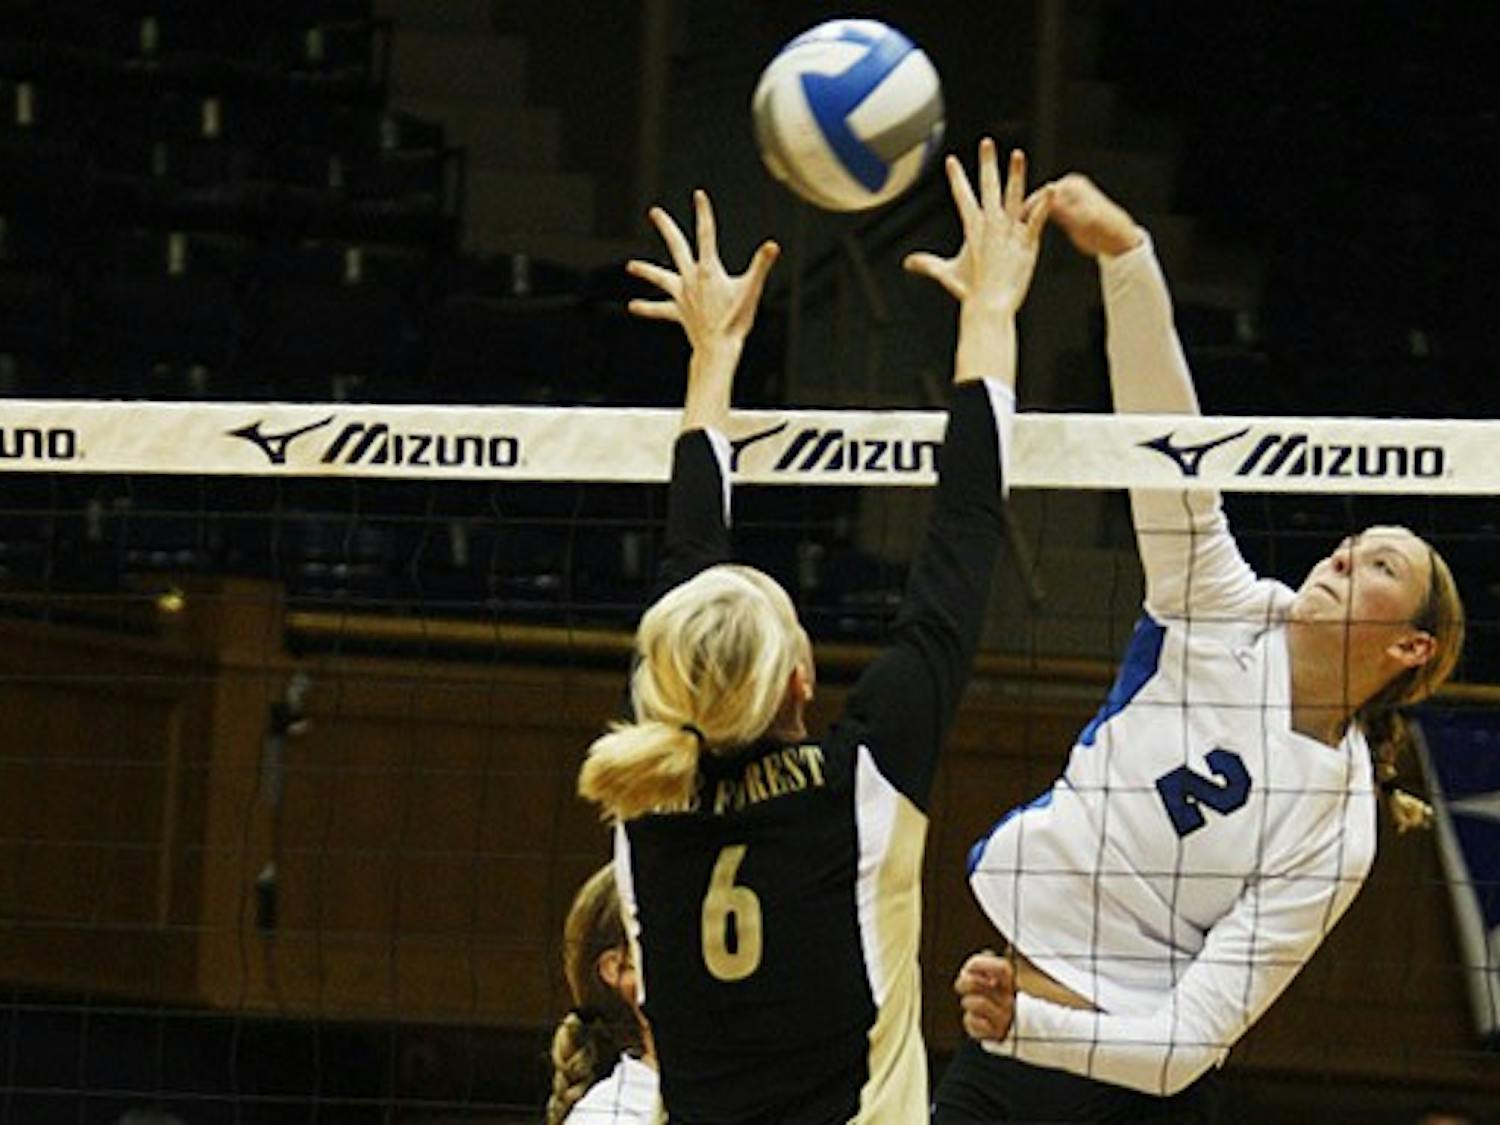 Junior Becci Burling had 12 kills against Tennessee and finished the season as the Blue Devils’ second-leading attacker with 340 kills.